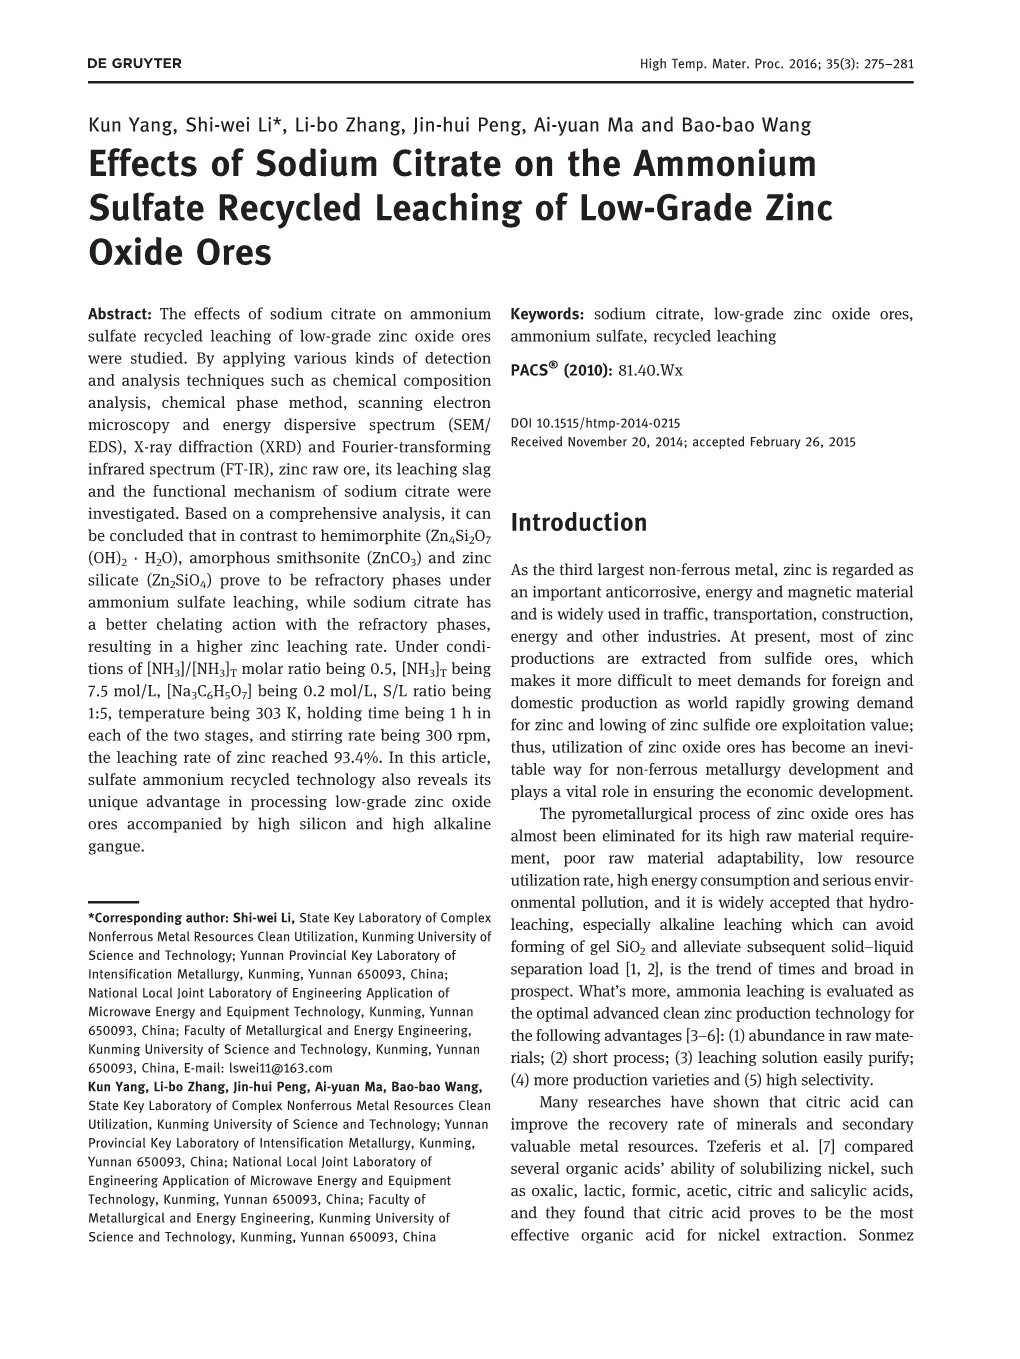 Effects of Sodium Citrate on the Ammonium Sulfate Recycled Leaching of Low-Grade Zinc Oxide Ores